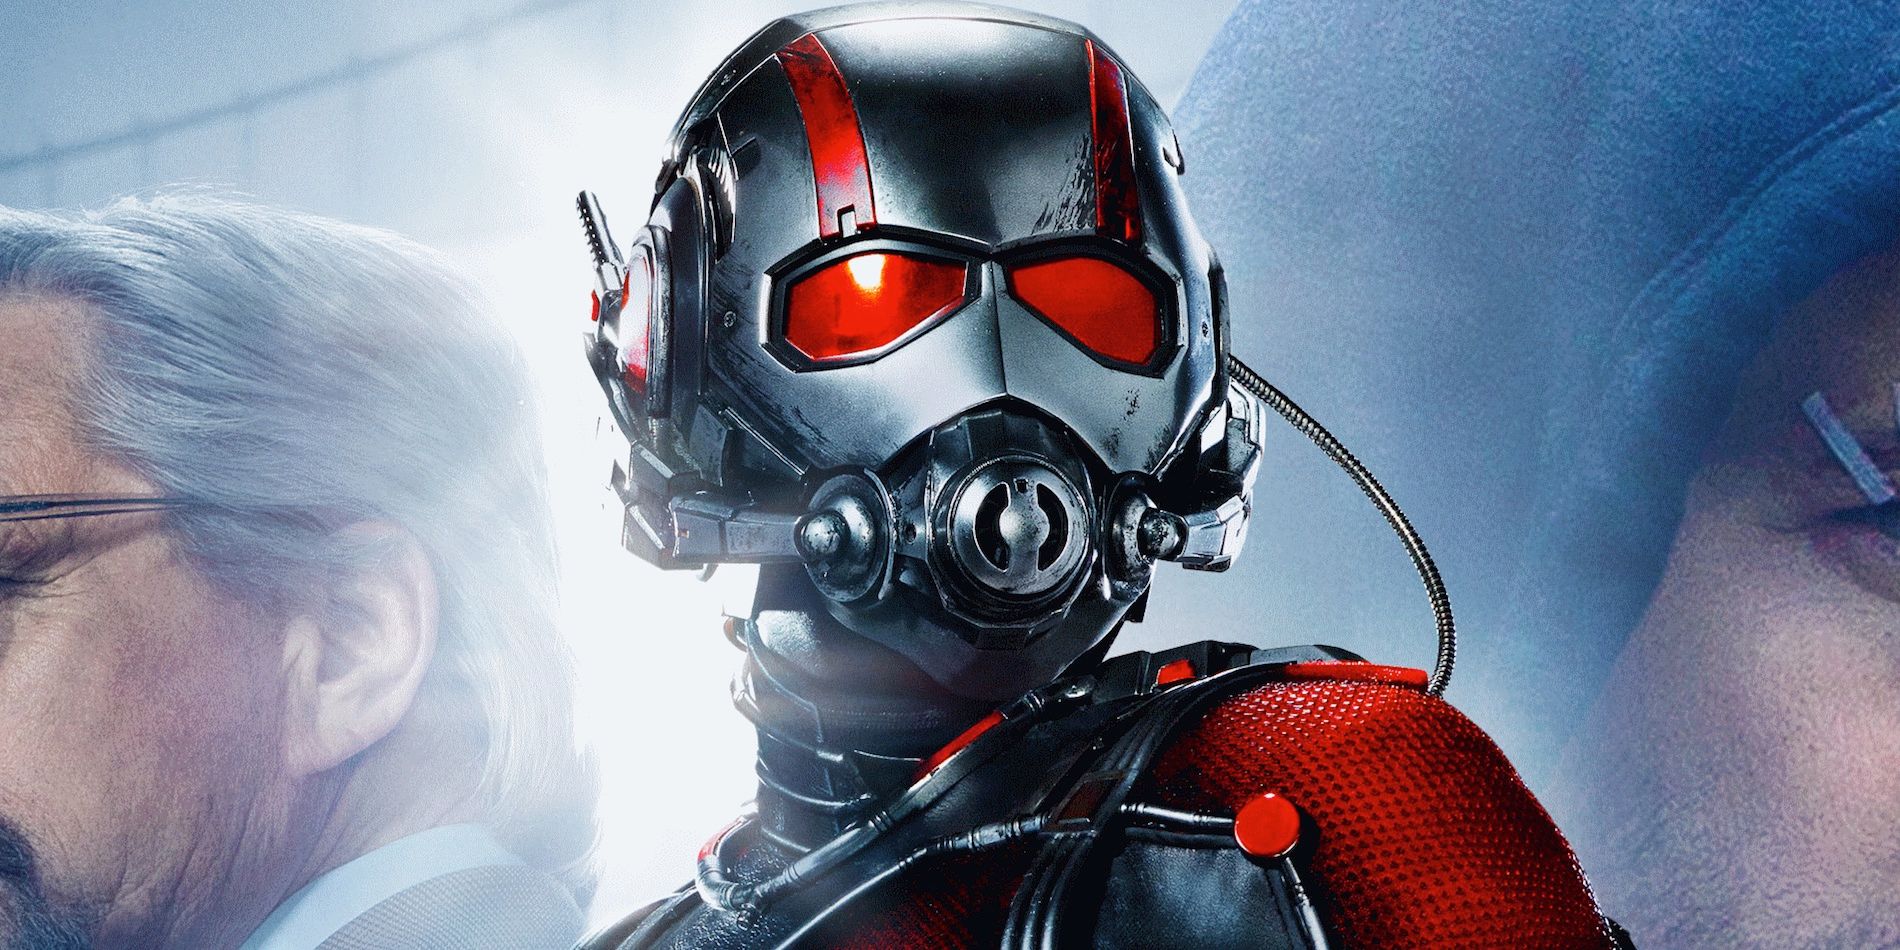 The Ant-Man costume appears on a promotional poster for the movie